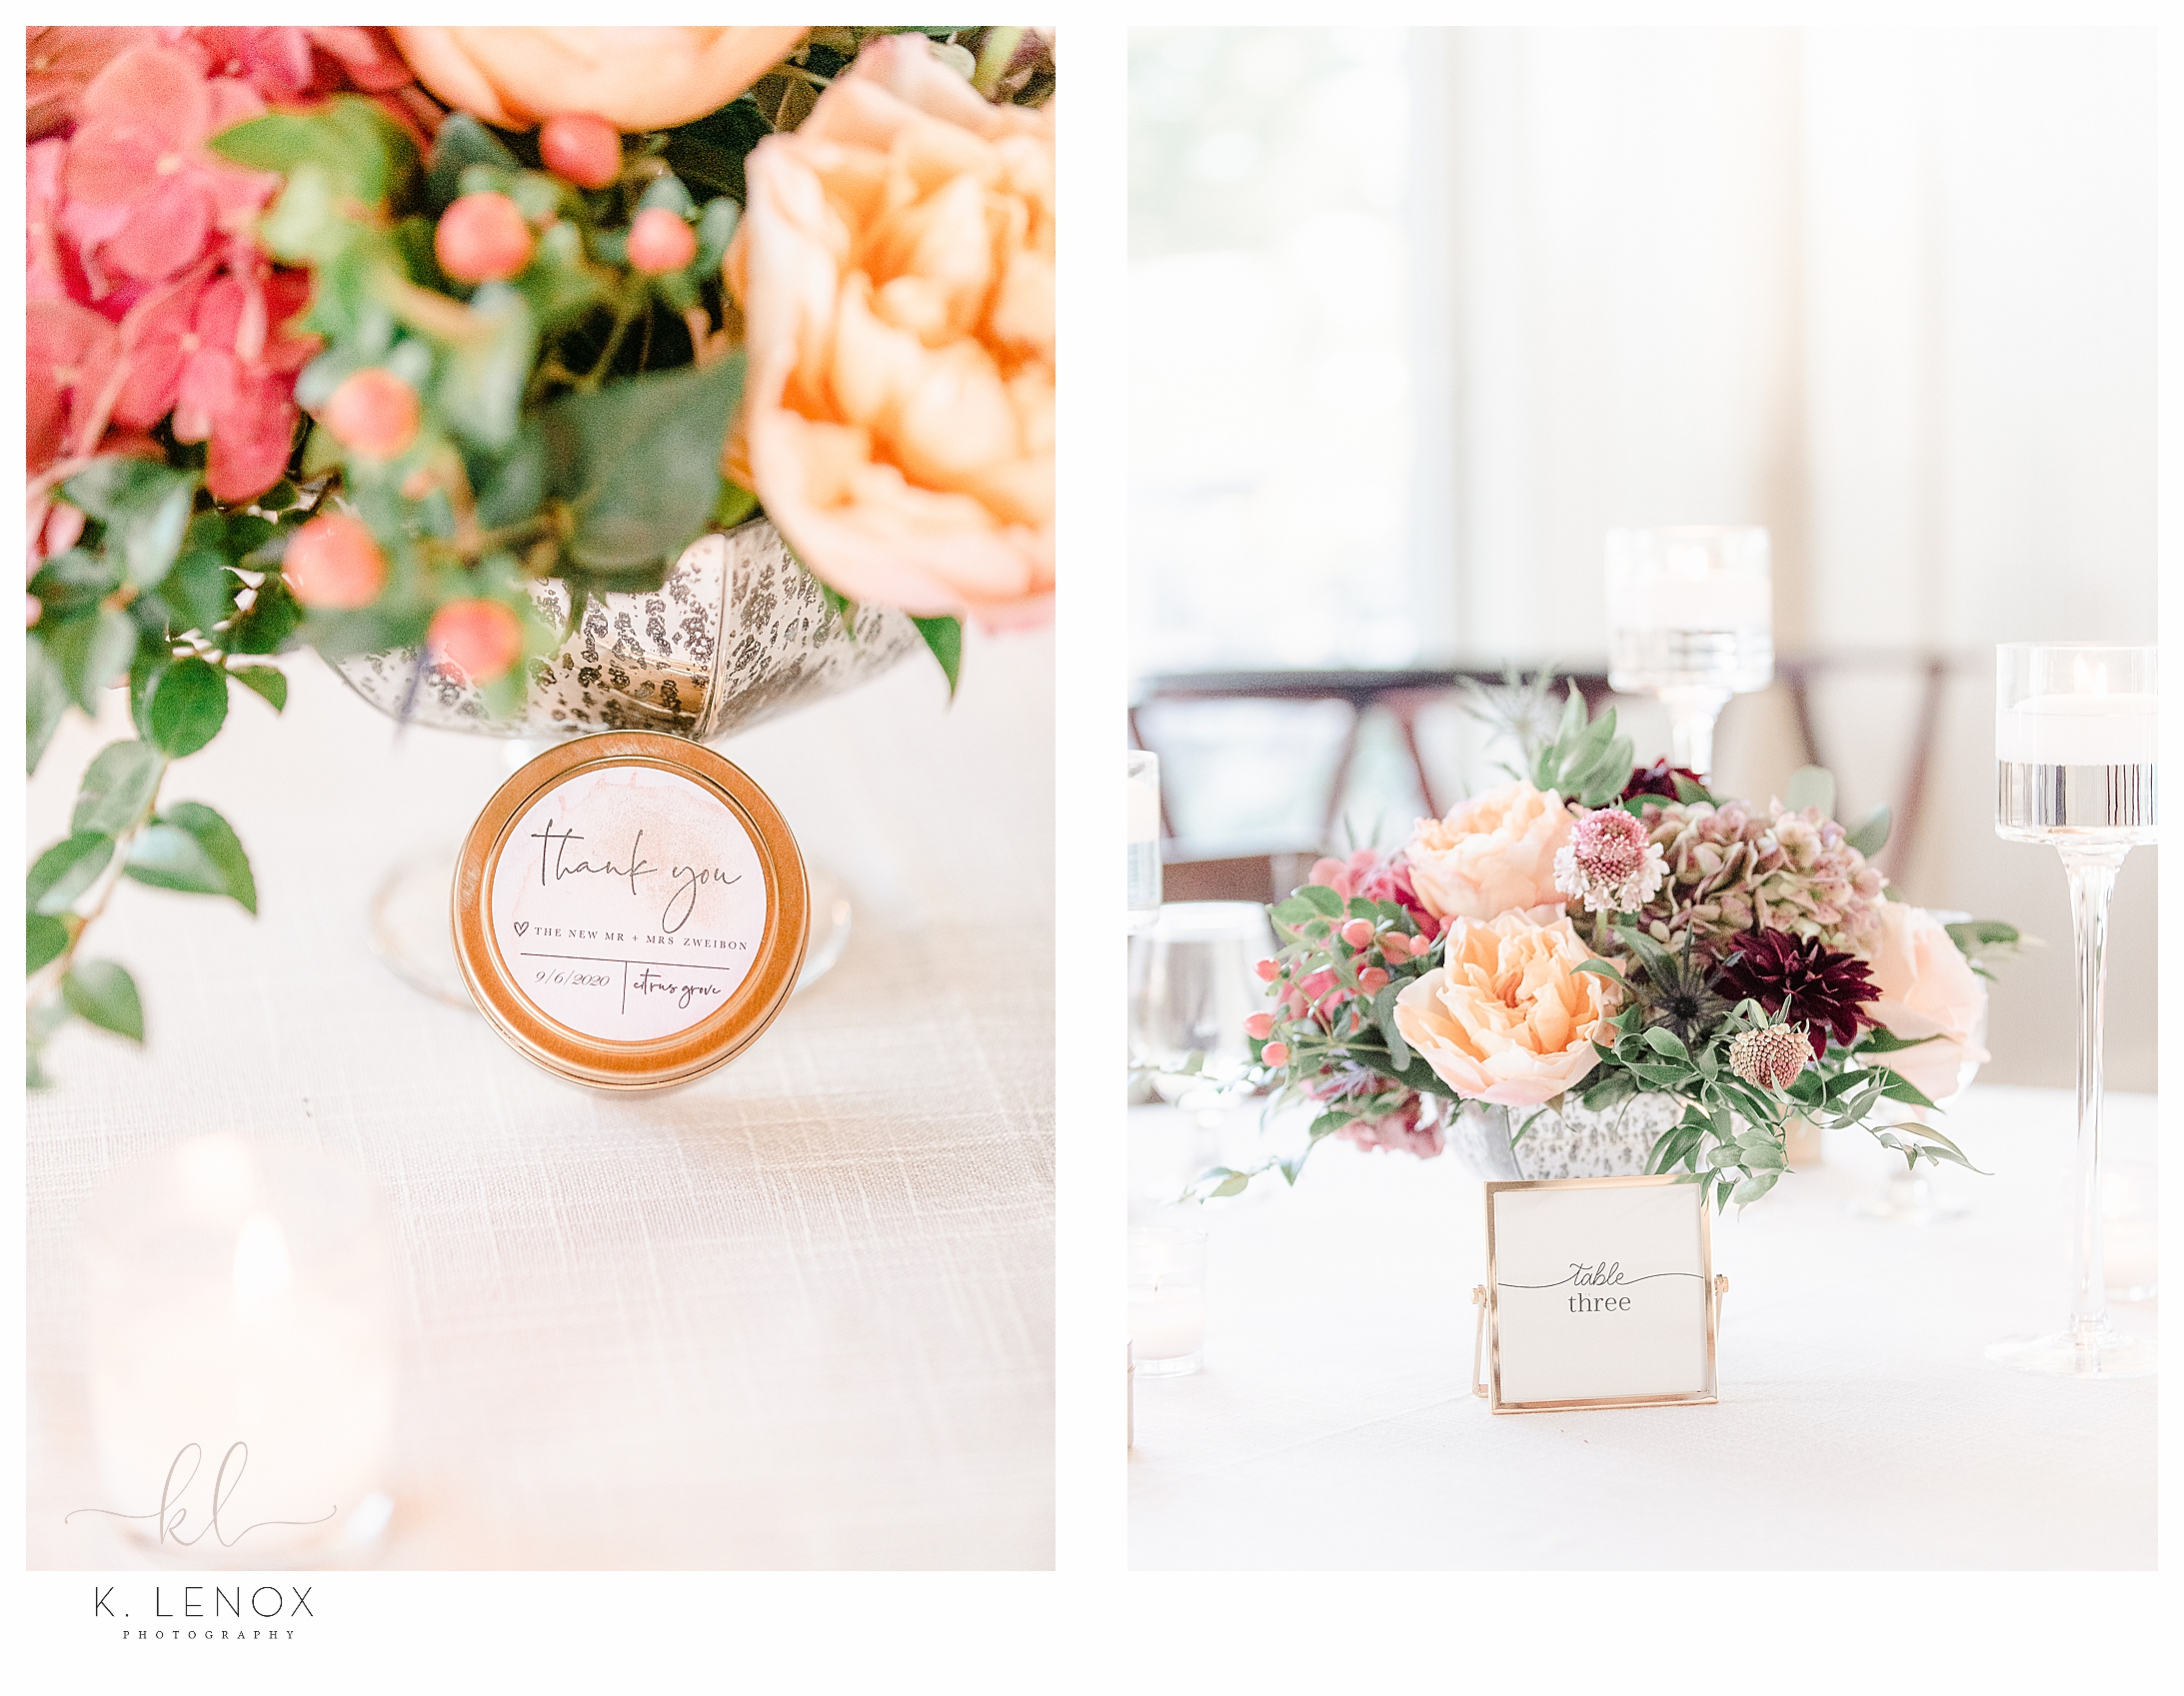 Light and Airy wedding photography showing beautiful wedding day floral details. 